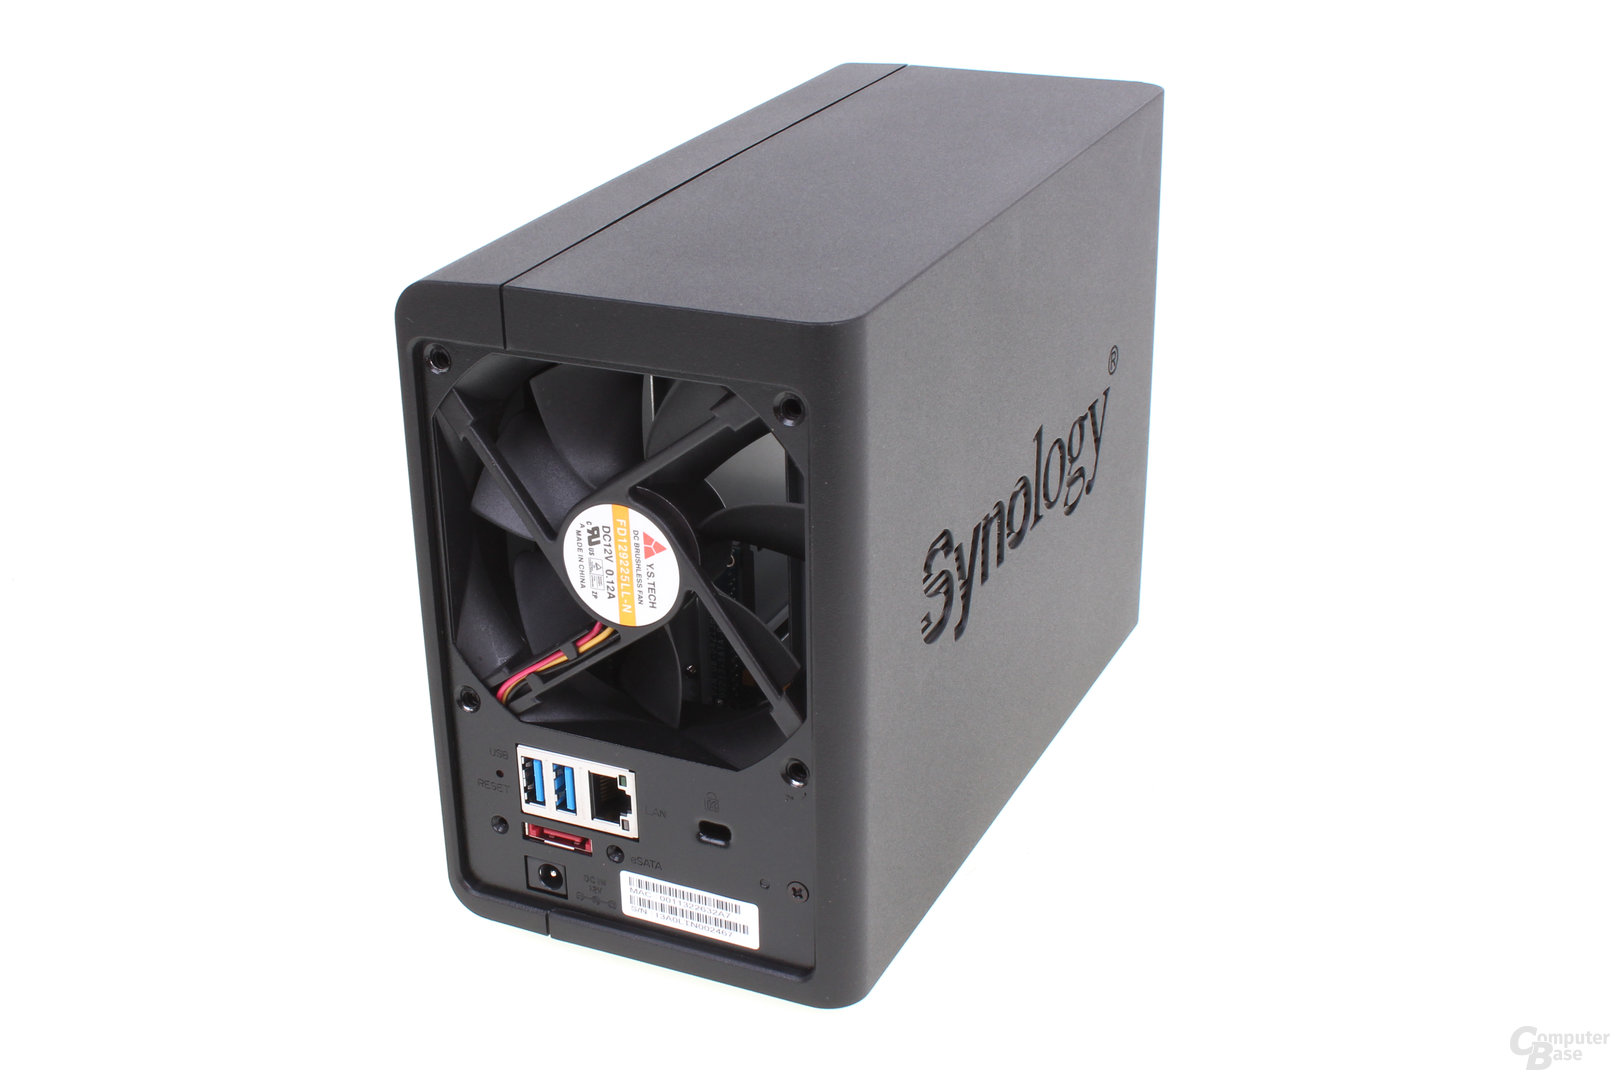 Synology DS214play im Test